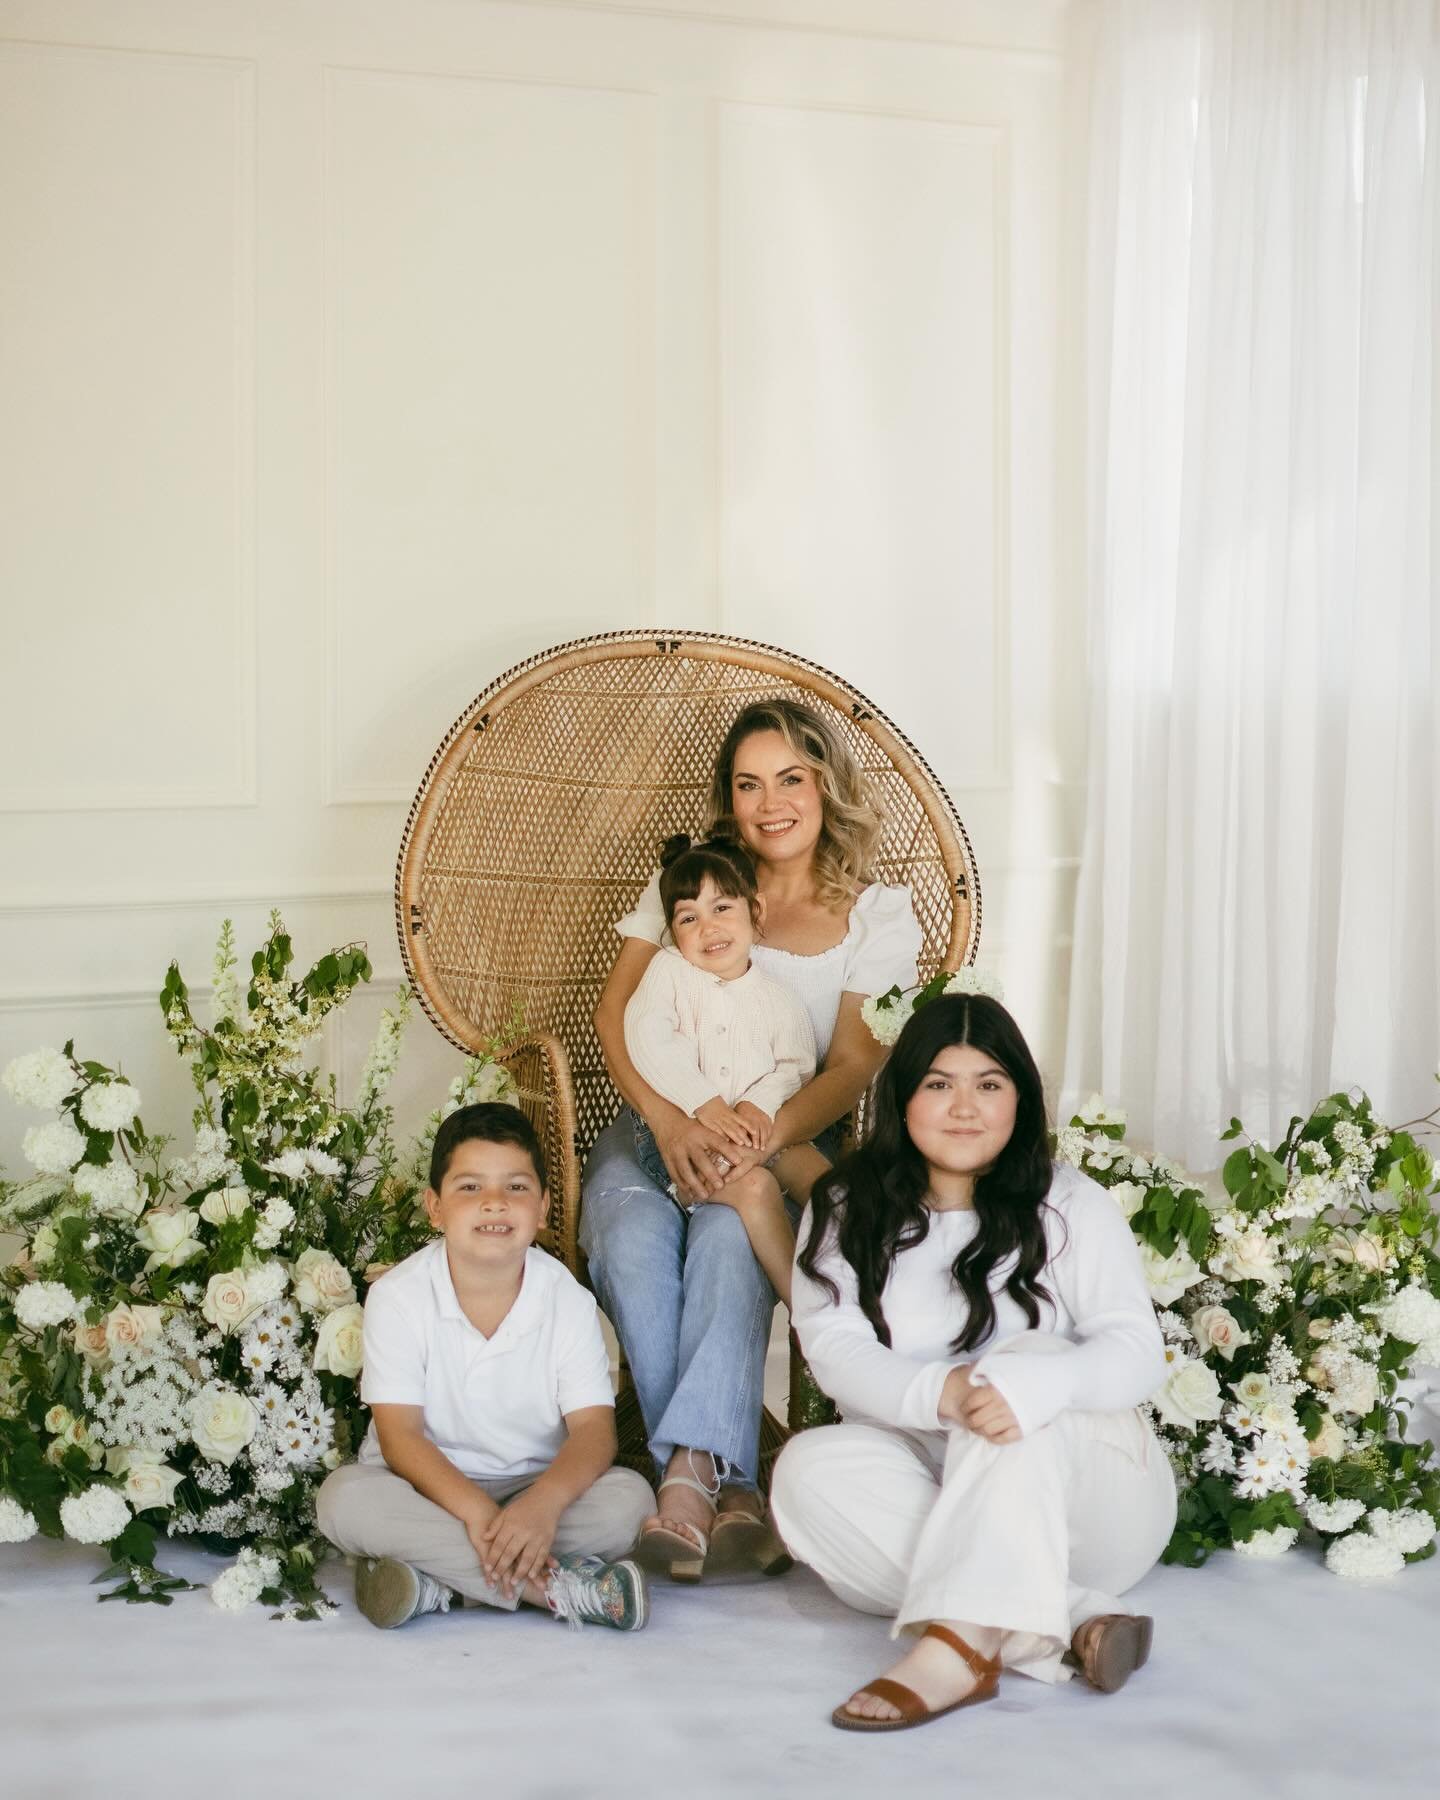 ✨ Happy Mother&rsquo;s Day ✨

Among my life's achievements, being a mother to my three wonderful children stands as my greatest. They are my world, and my reason behind everything I do. 

Happy Mother's Day to all the hardworking moms out there, tire